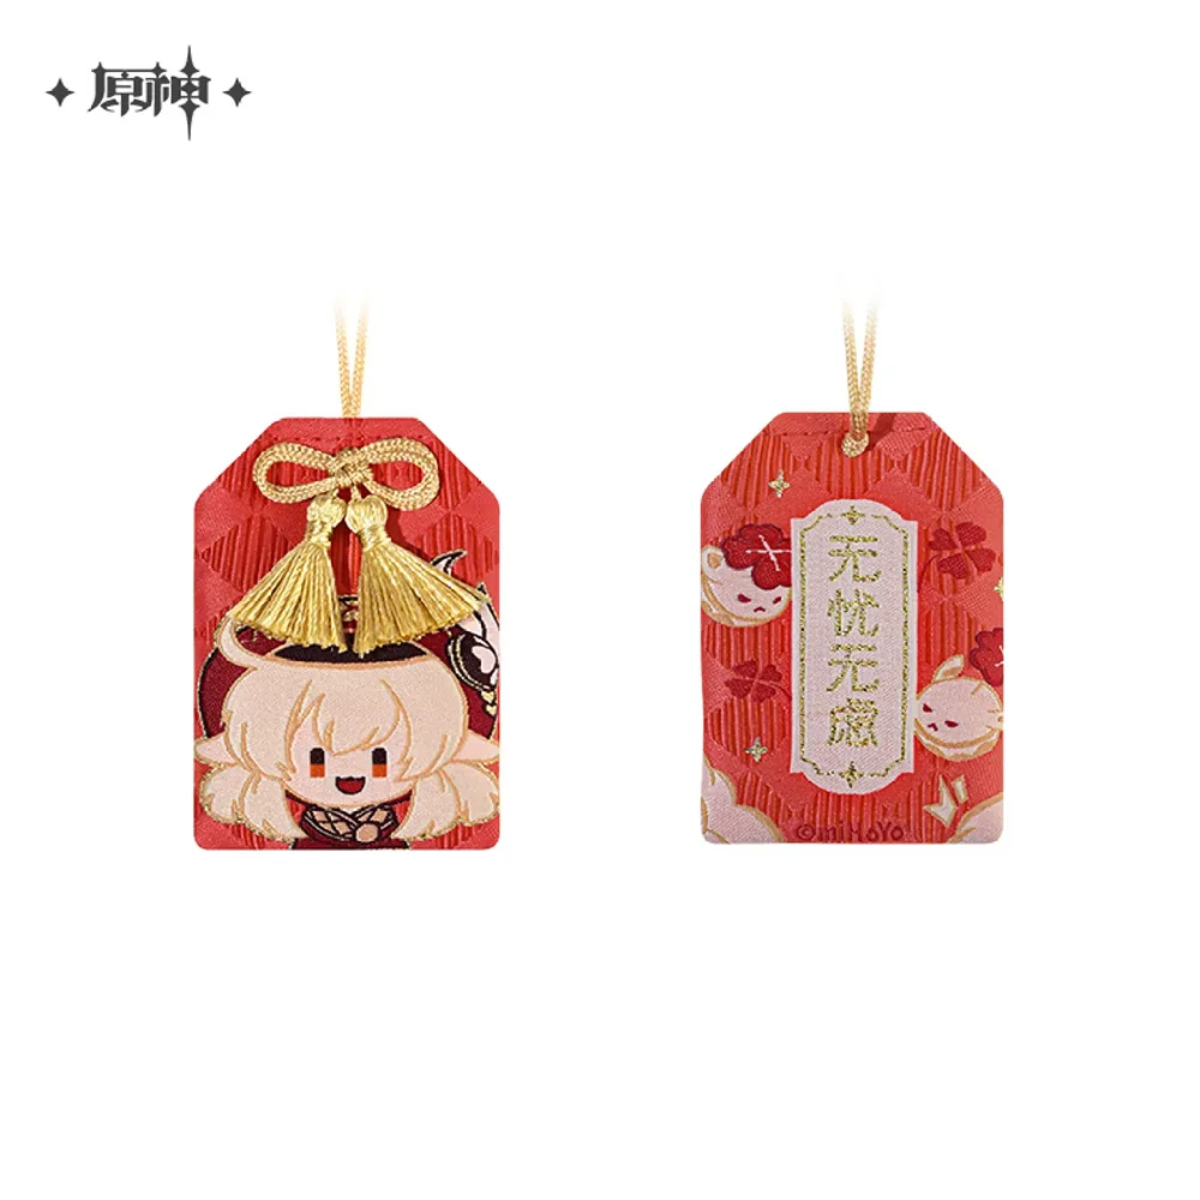 miHoYo Genshin Impact Mondstadt Character Omamori Charm-Klee-miHoYo-Ace Cards &amp; Collectibles